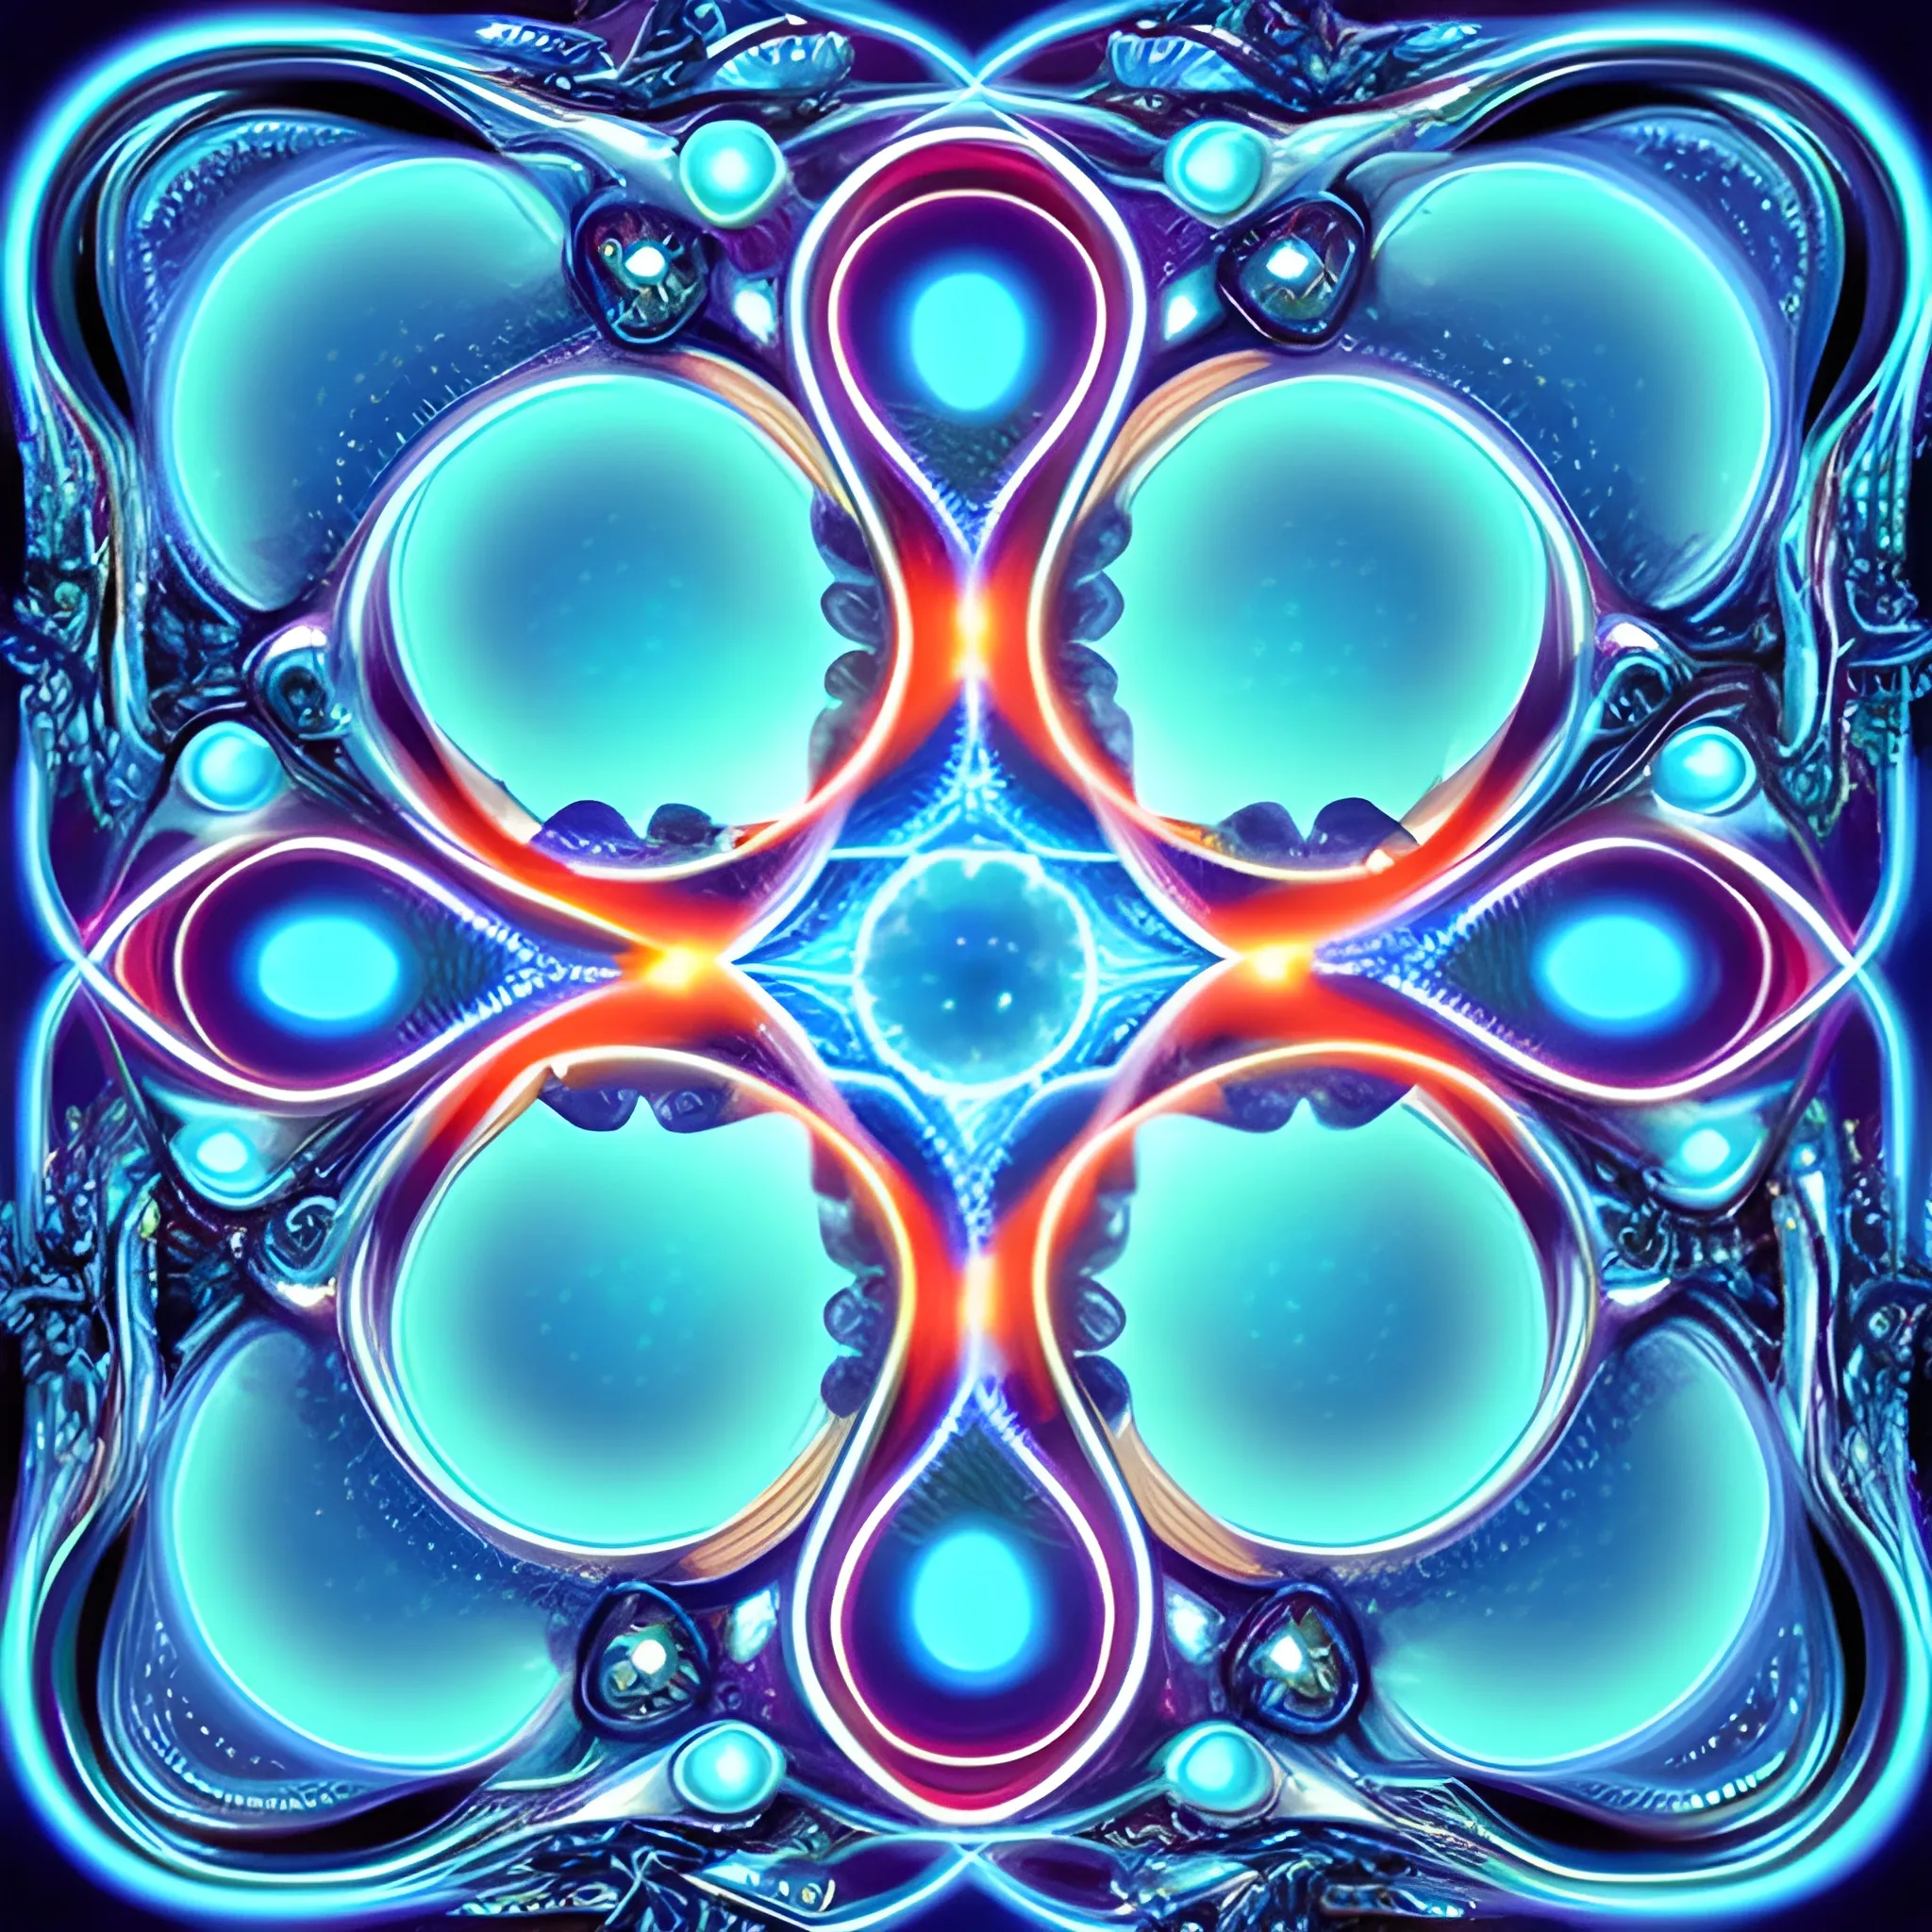 impressive,quantum world,appealing,astonishing,unforgettable,invincible, 4D,the most impactful/astounding images in the world,fractal geometry，infinite loop